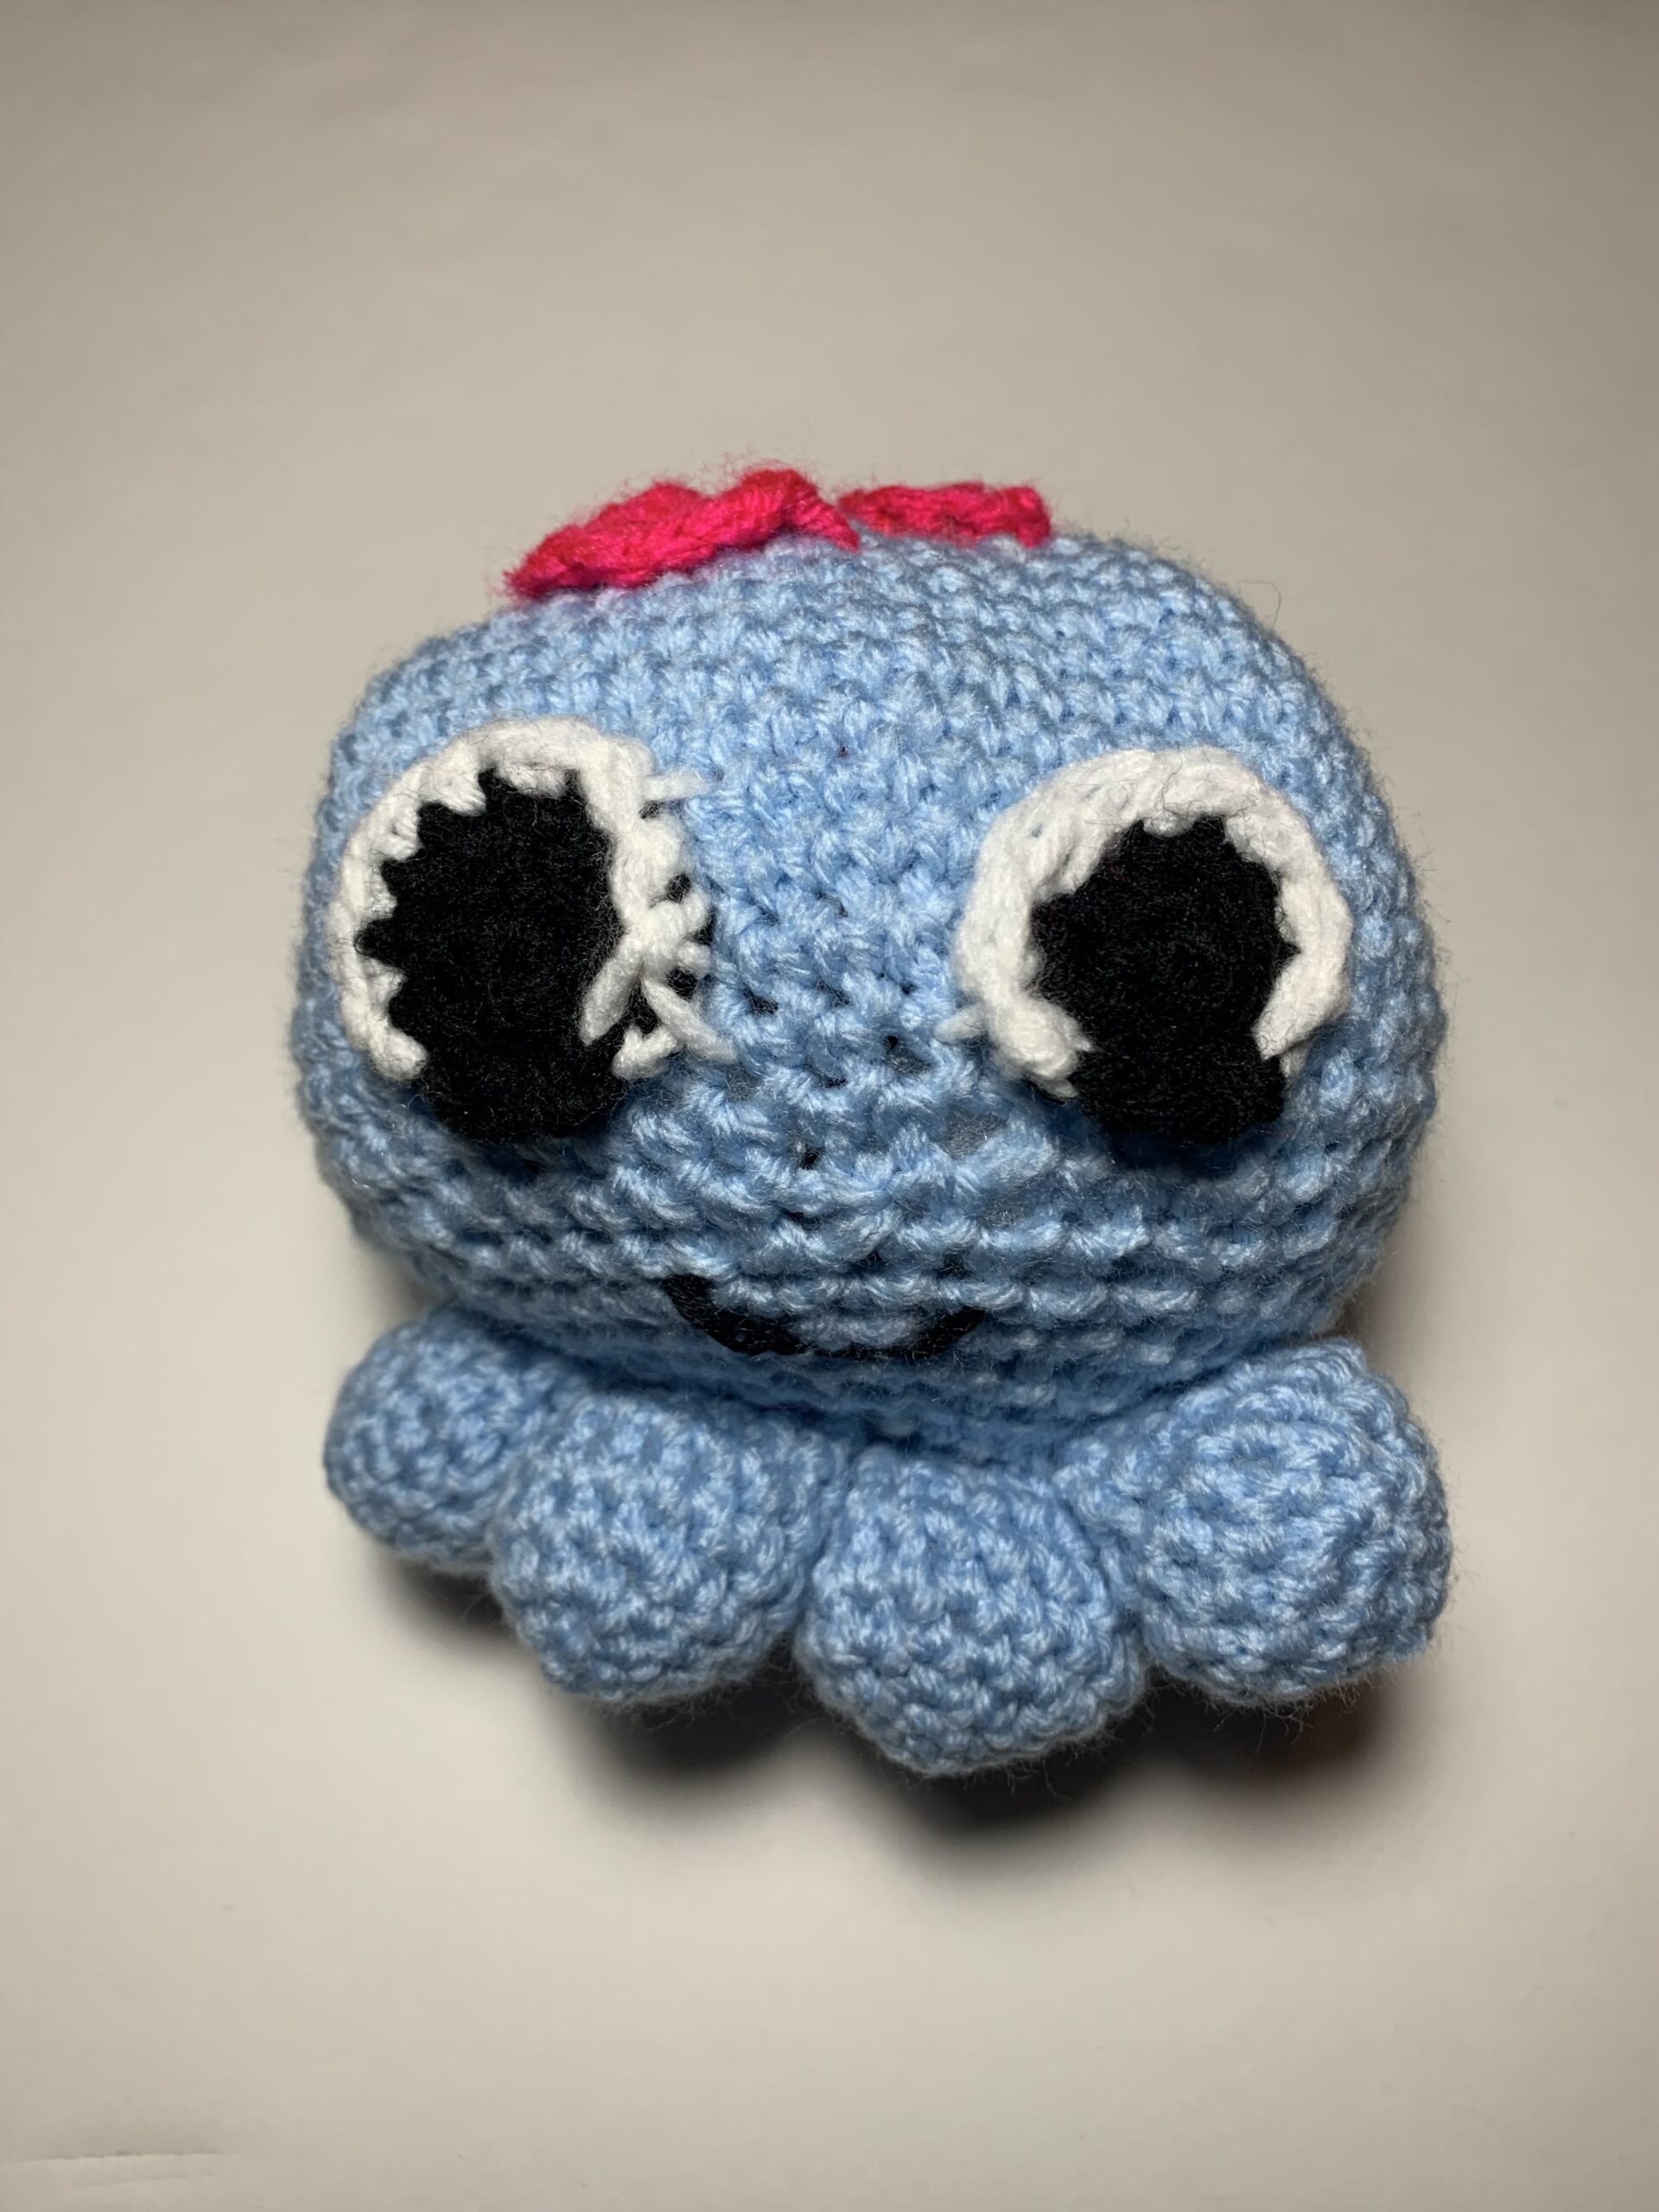 The Sims 4 Octopus from Nifty Knitting (FREE Crochet Pattern)